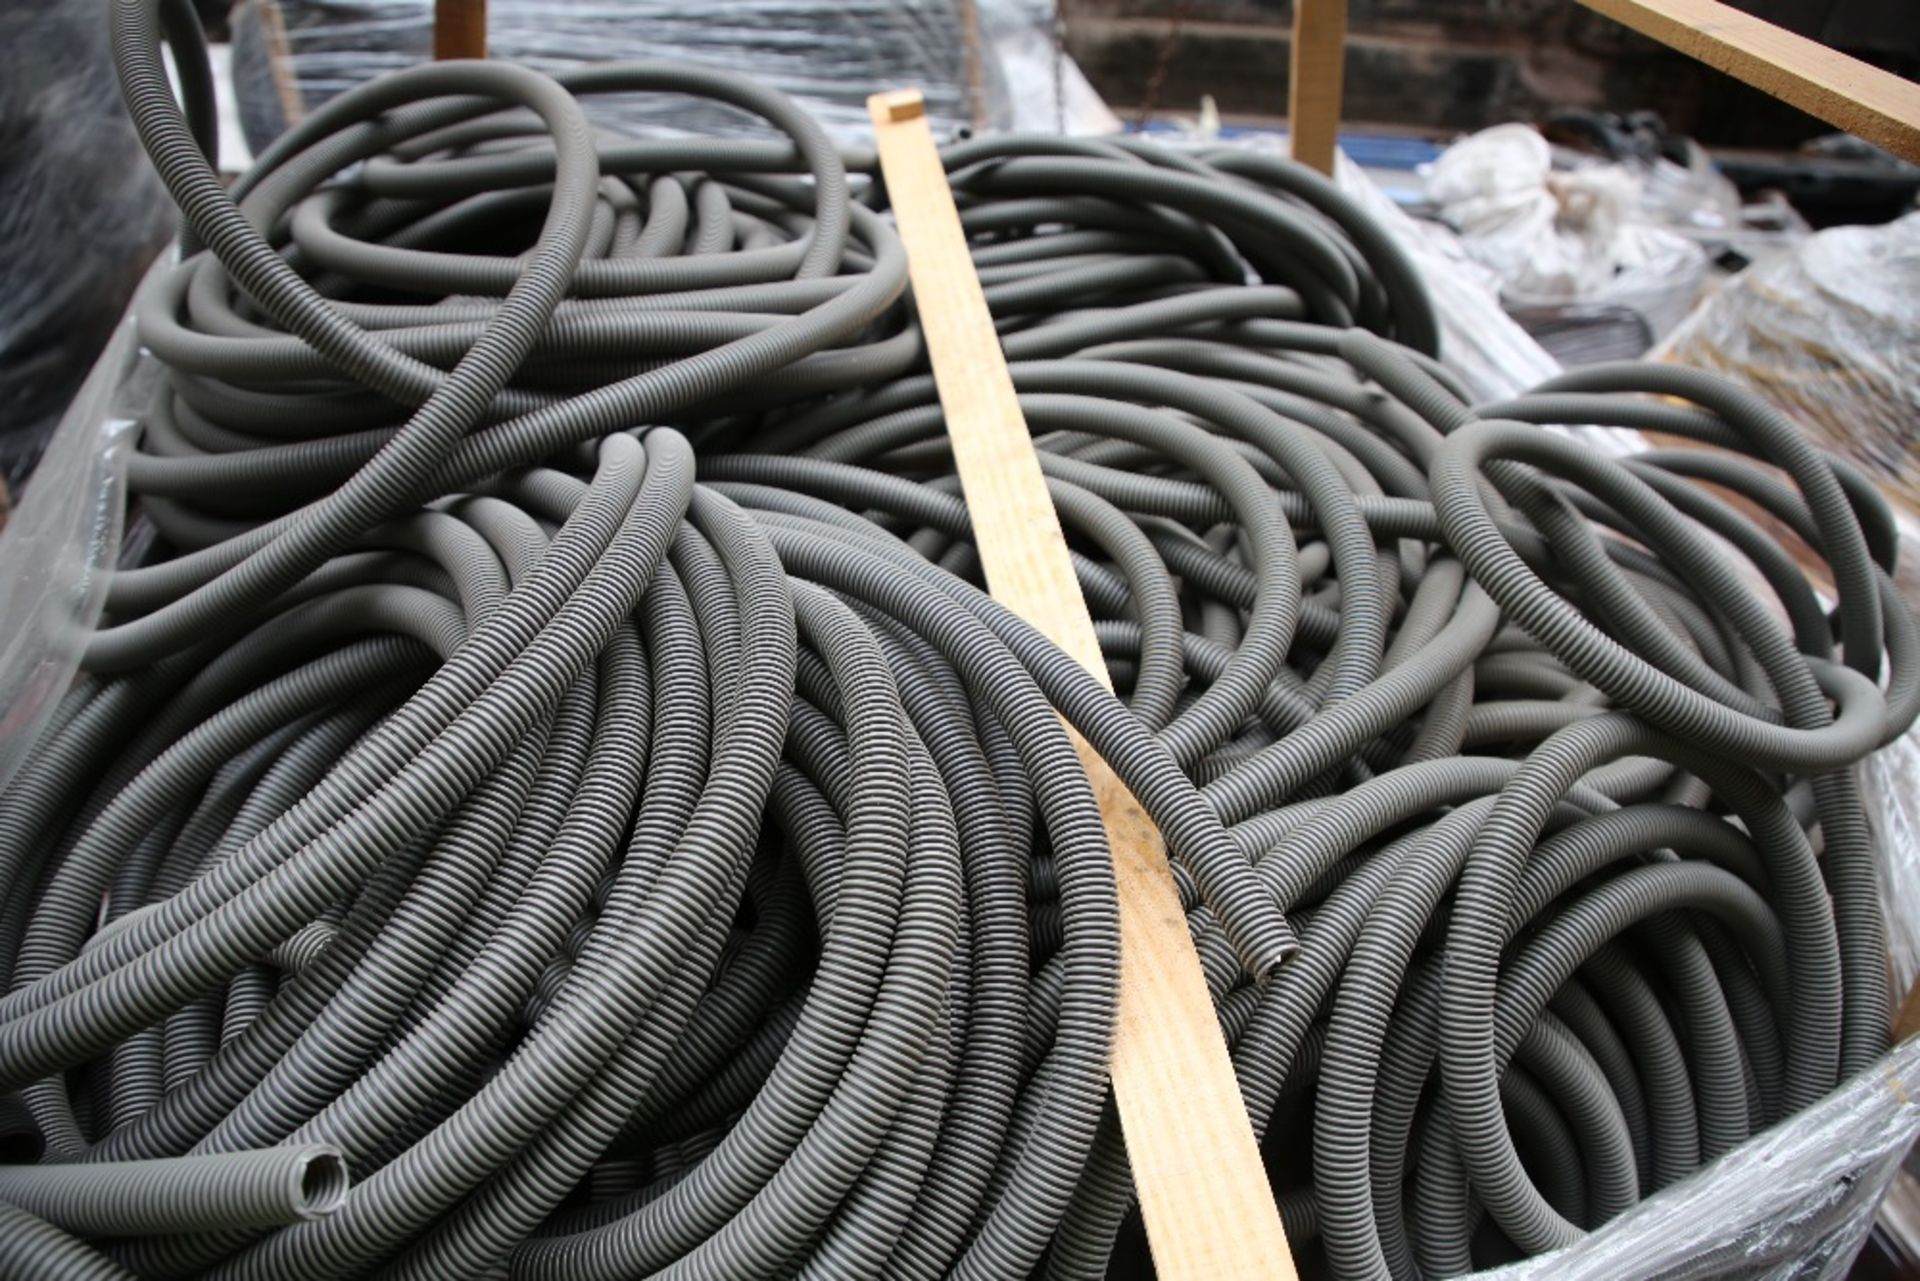 Plastic Cable Ducting / Pipe (1 Pallet) - Image 2 of 2